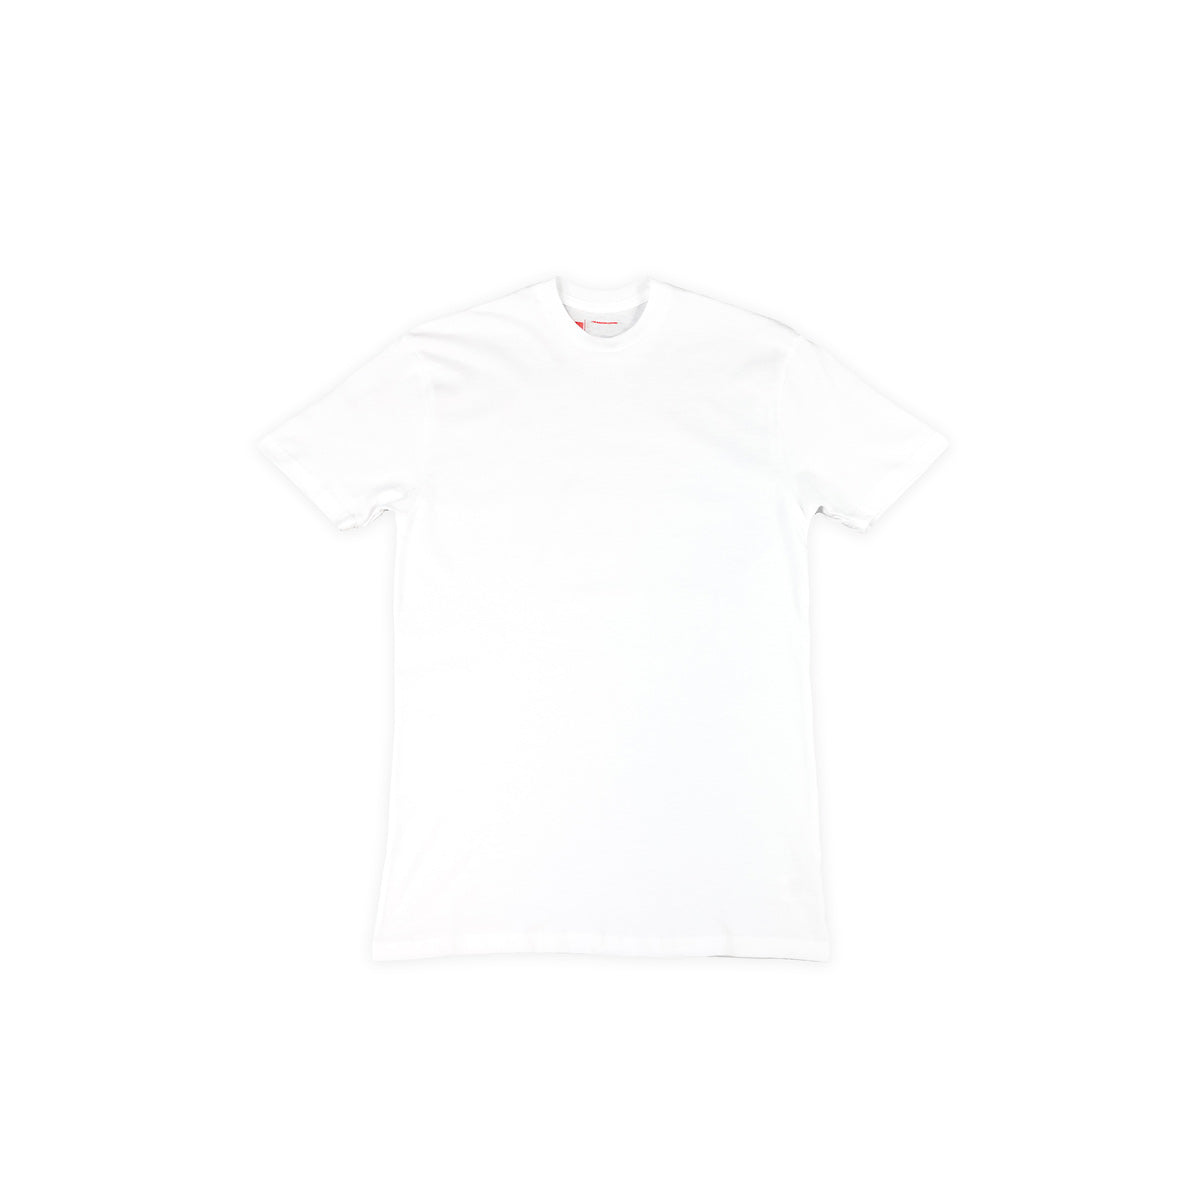 Marathon Shoulder T-Shirt (Ultra Fitted) - White/Red